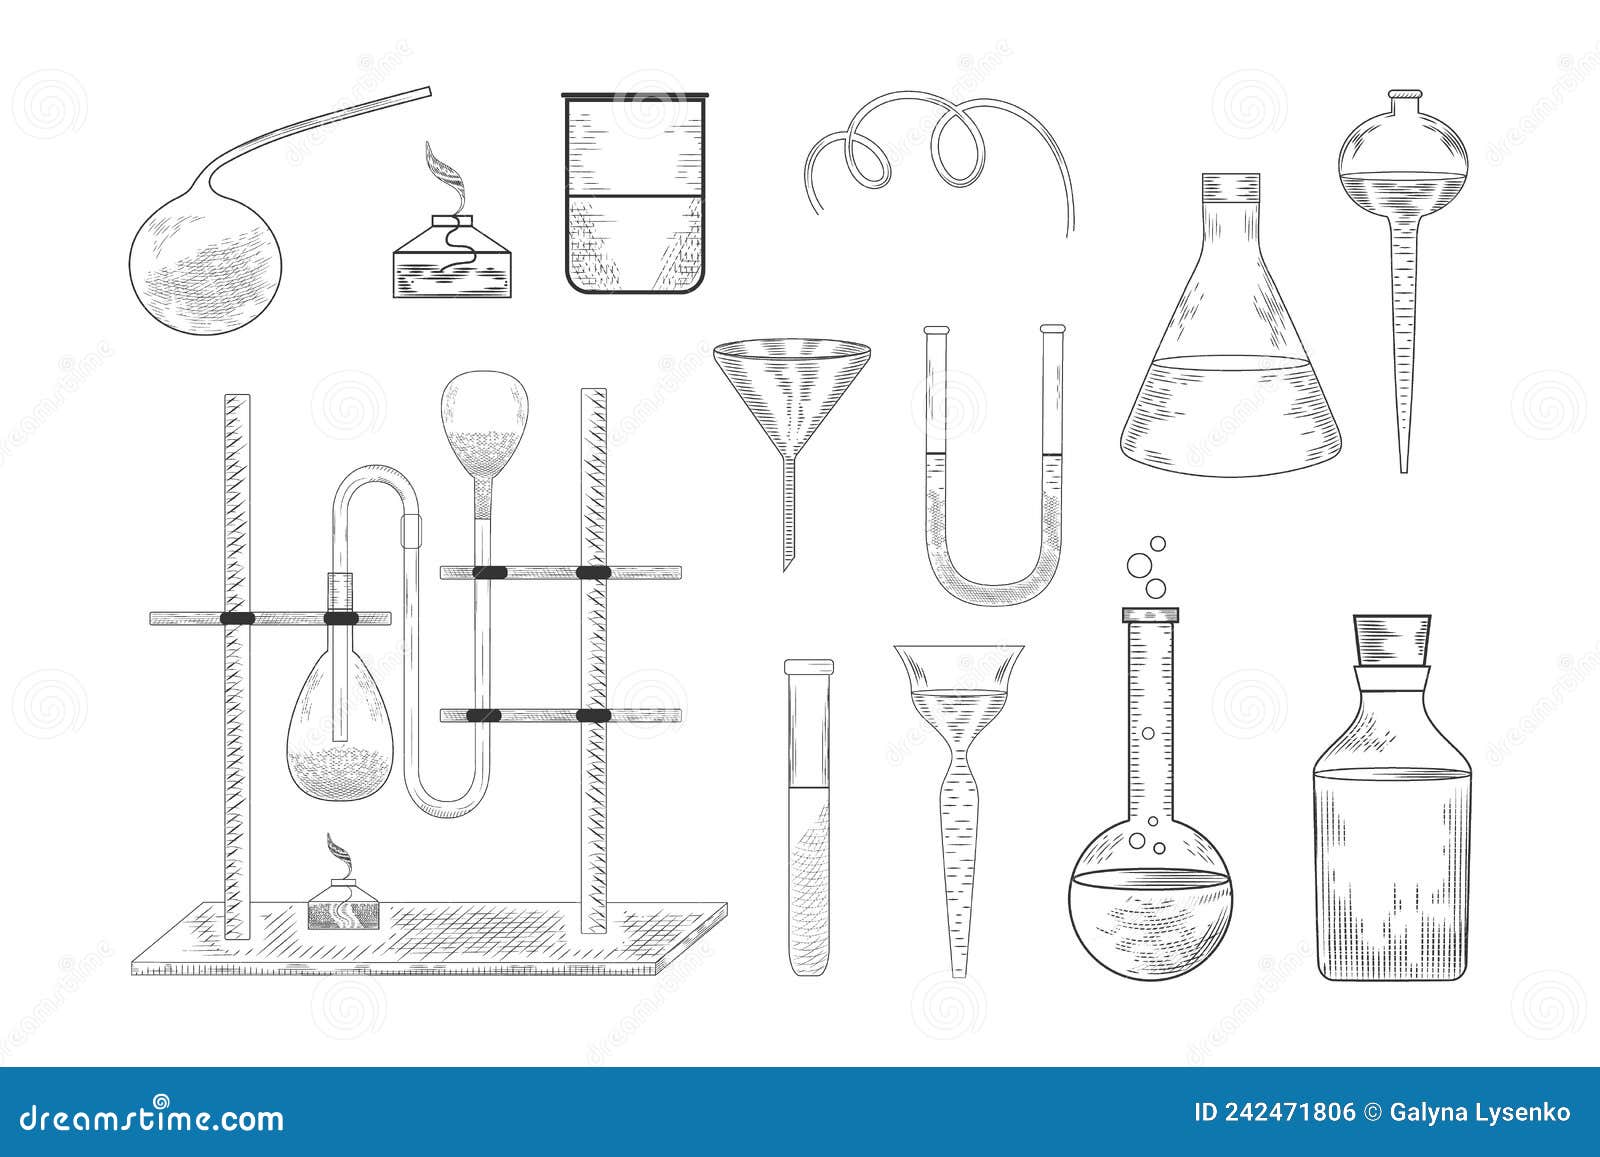 Premium Vector | Sketch of chemical laboratory objects glassware for a  chemical experiment on a chalk board vector